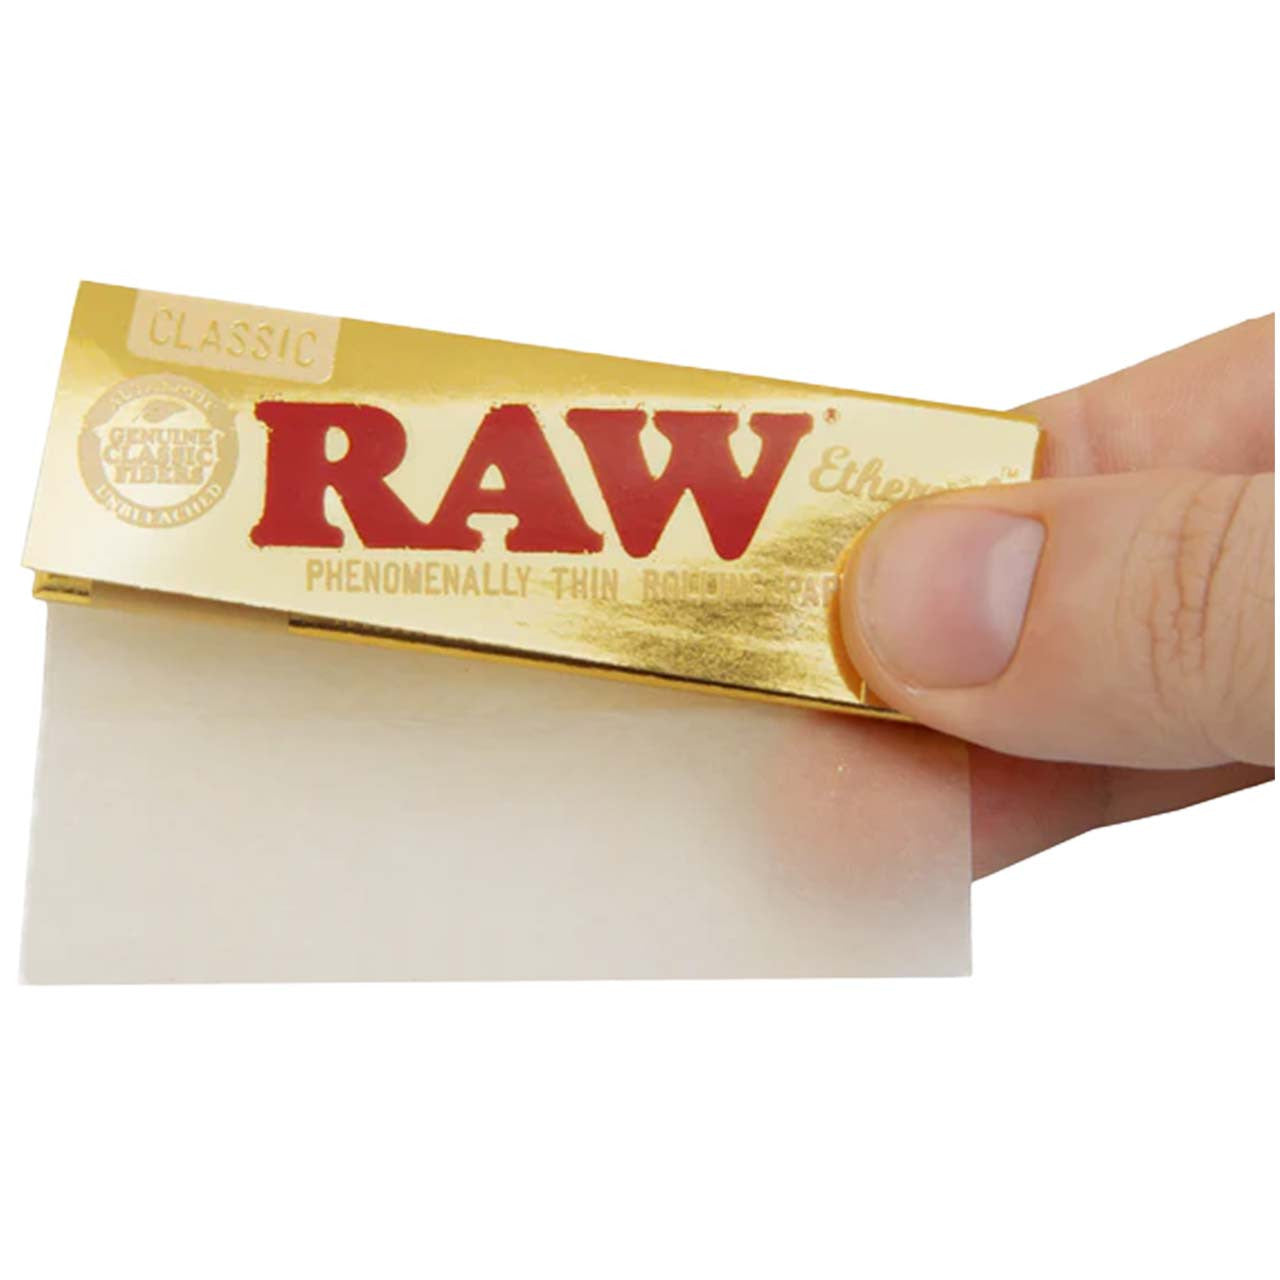 RAW CLASSIC ETHEREAL 1 1/4 ROLLING PAPERS 24CT 50PK